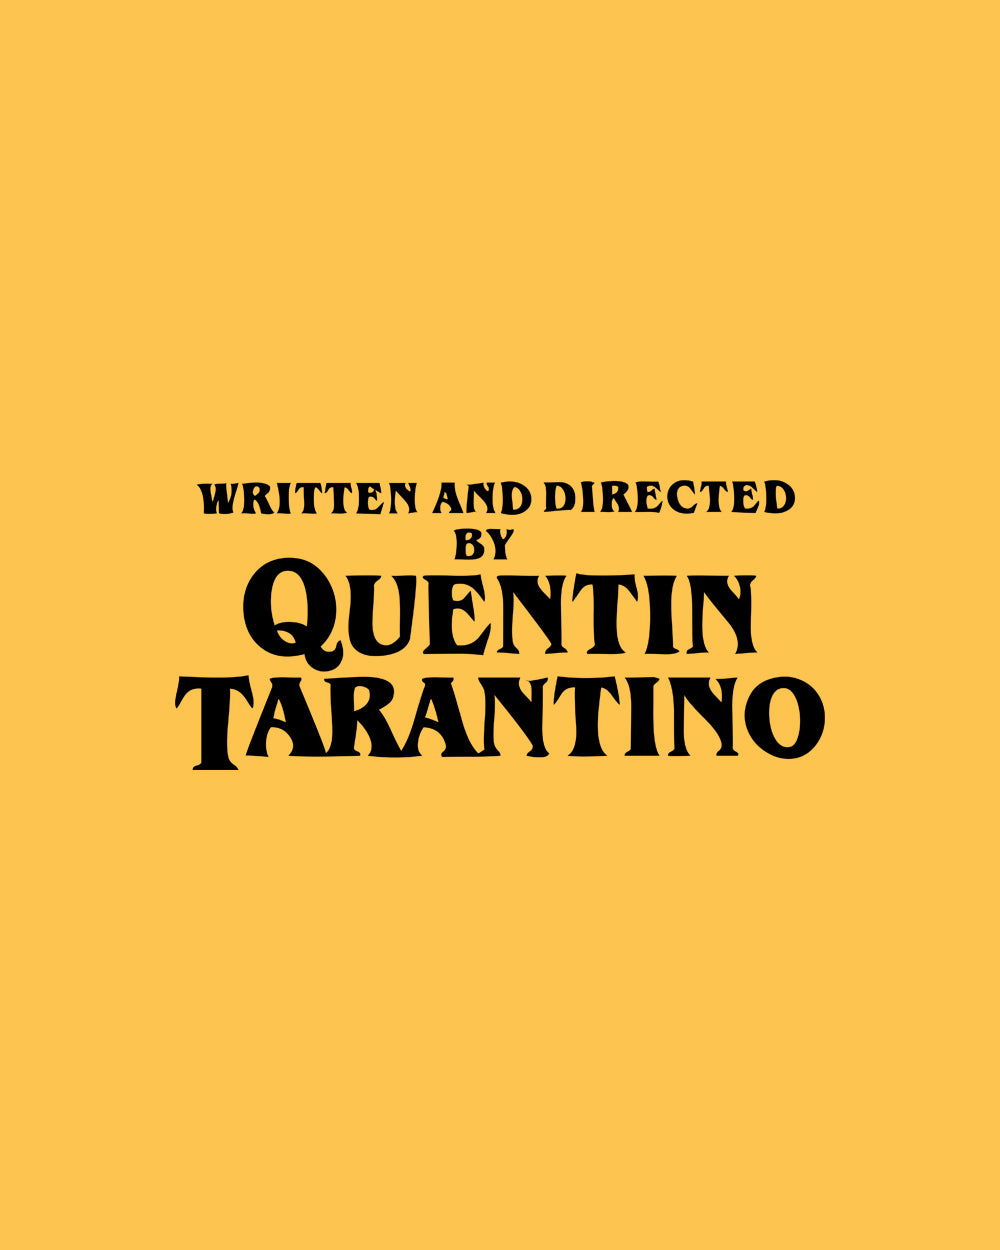 Written and Directed by Quentin Tarantino Sweater Australia Online #colour_yellow